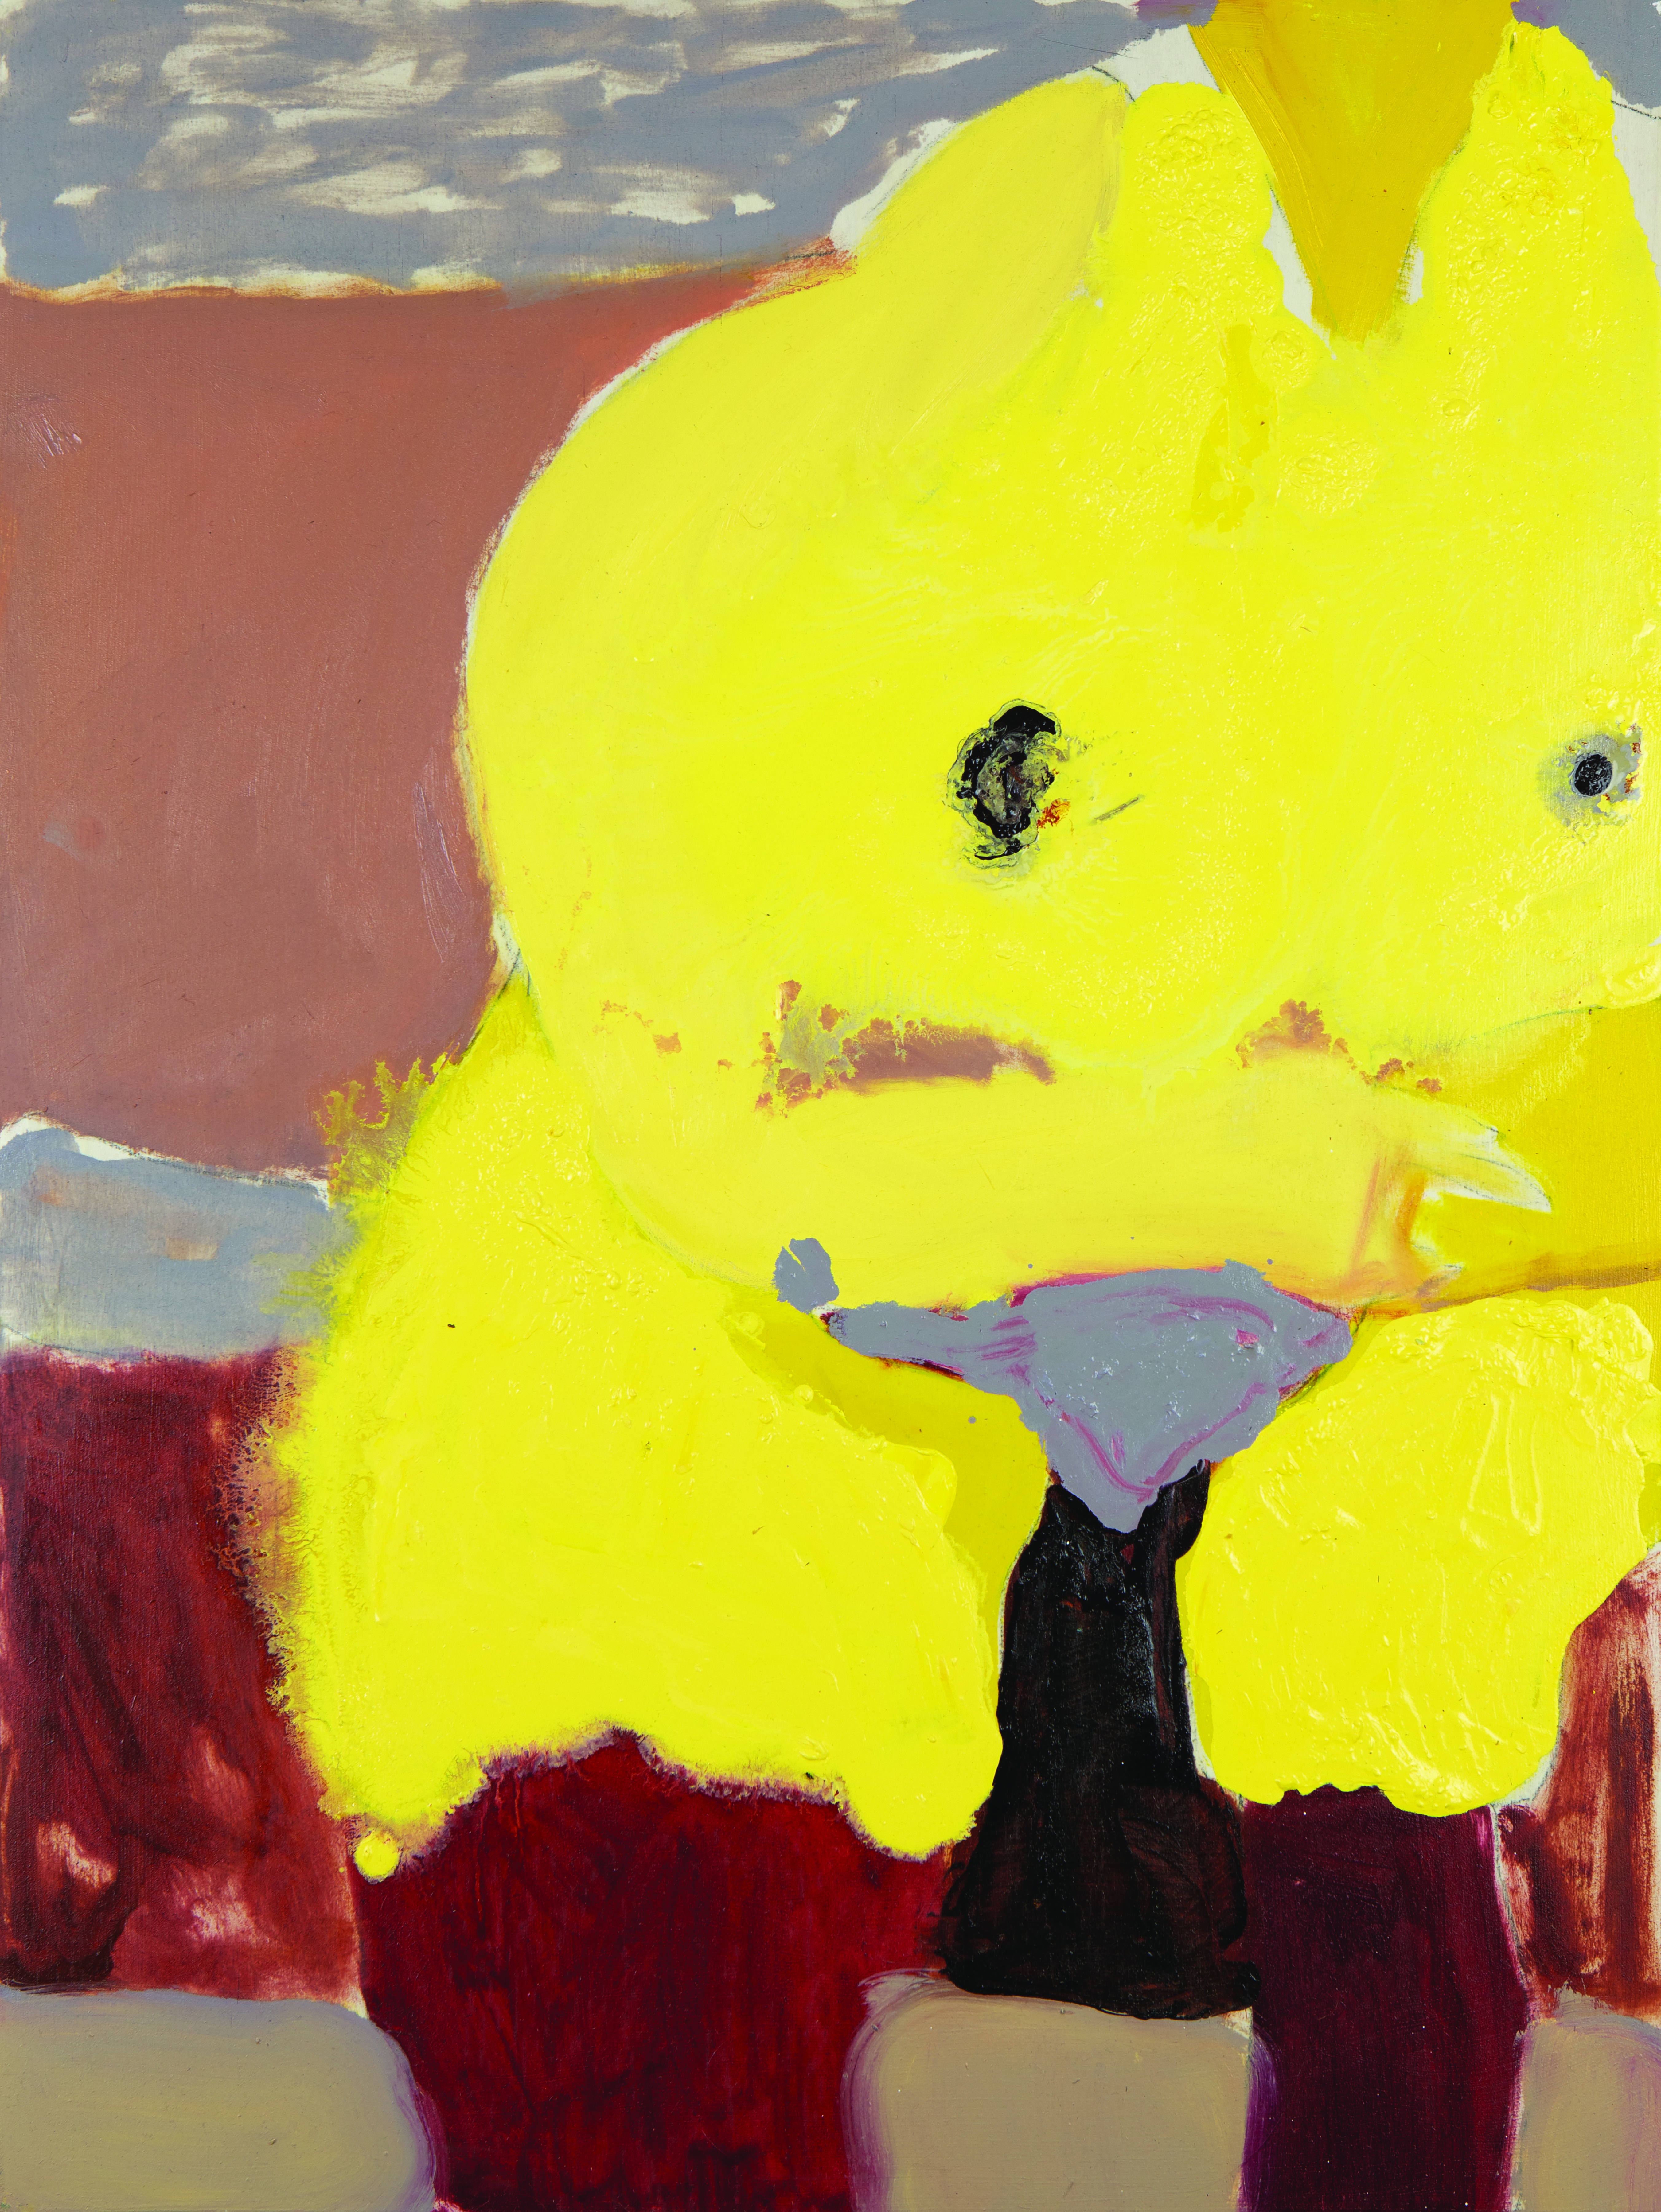 Frances Stanfield, Bikini Yellow, Oil and pencil on wooden panel, 2022